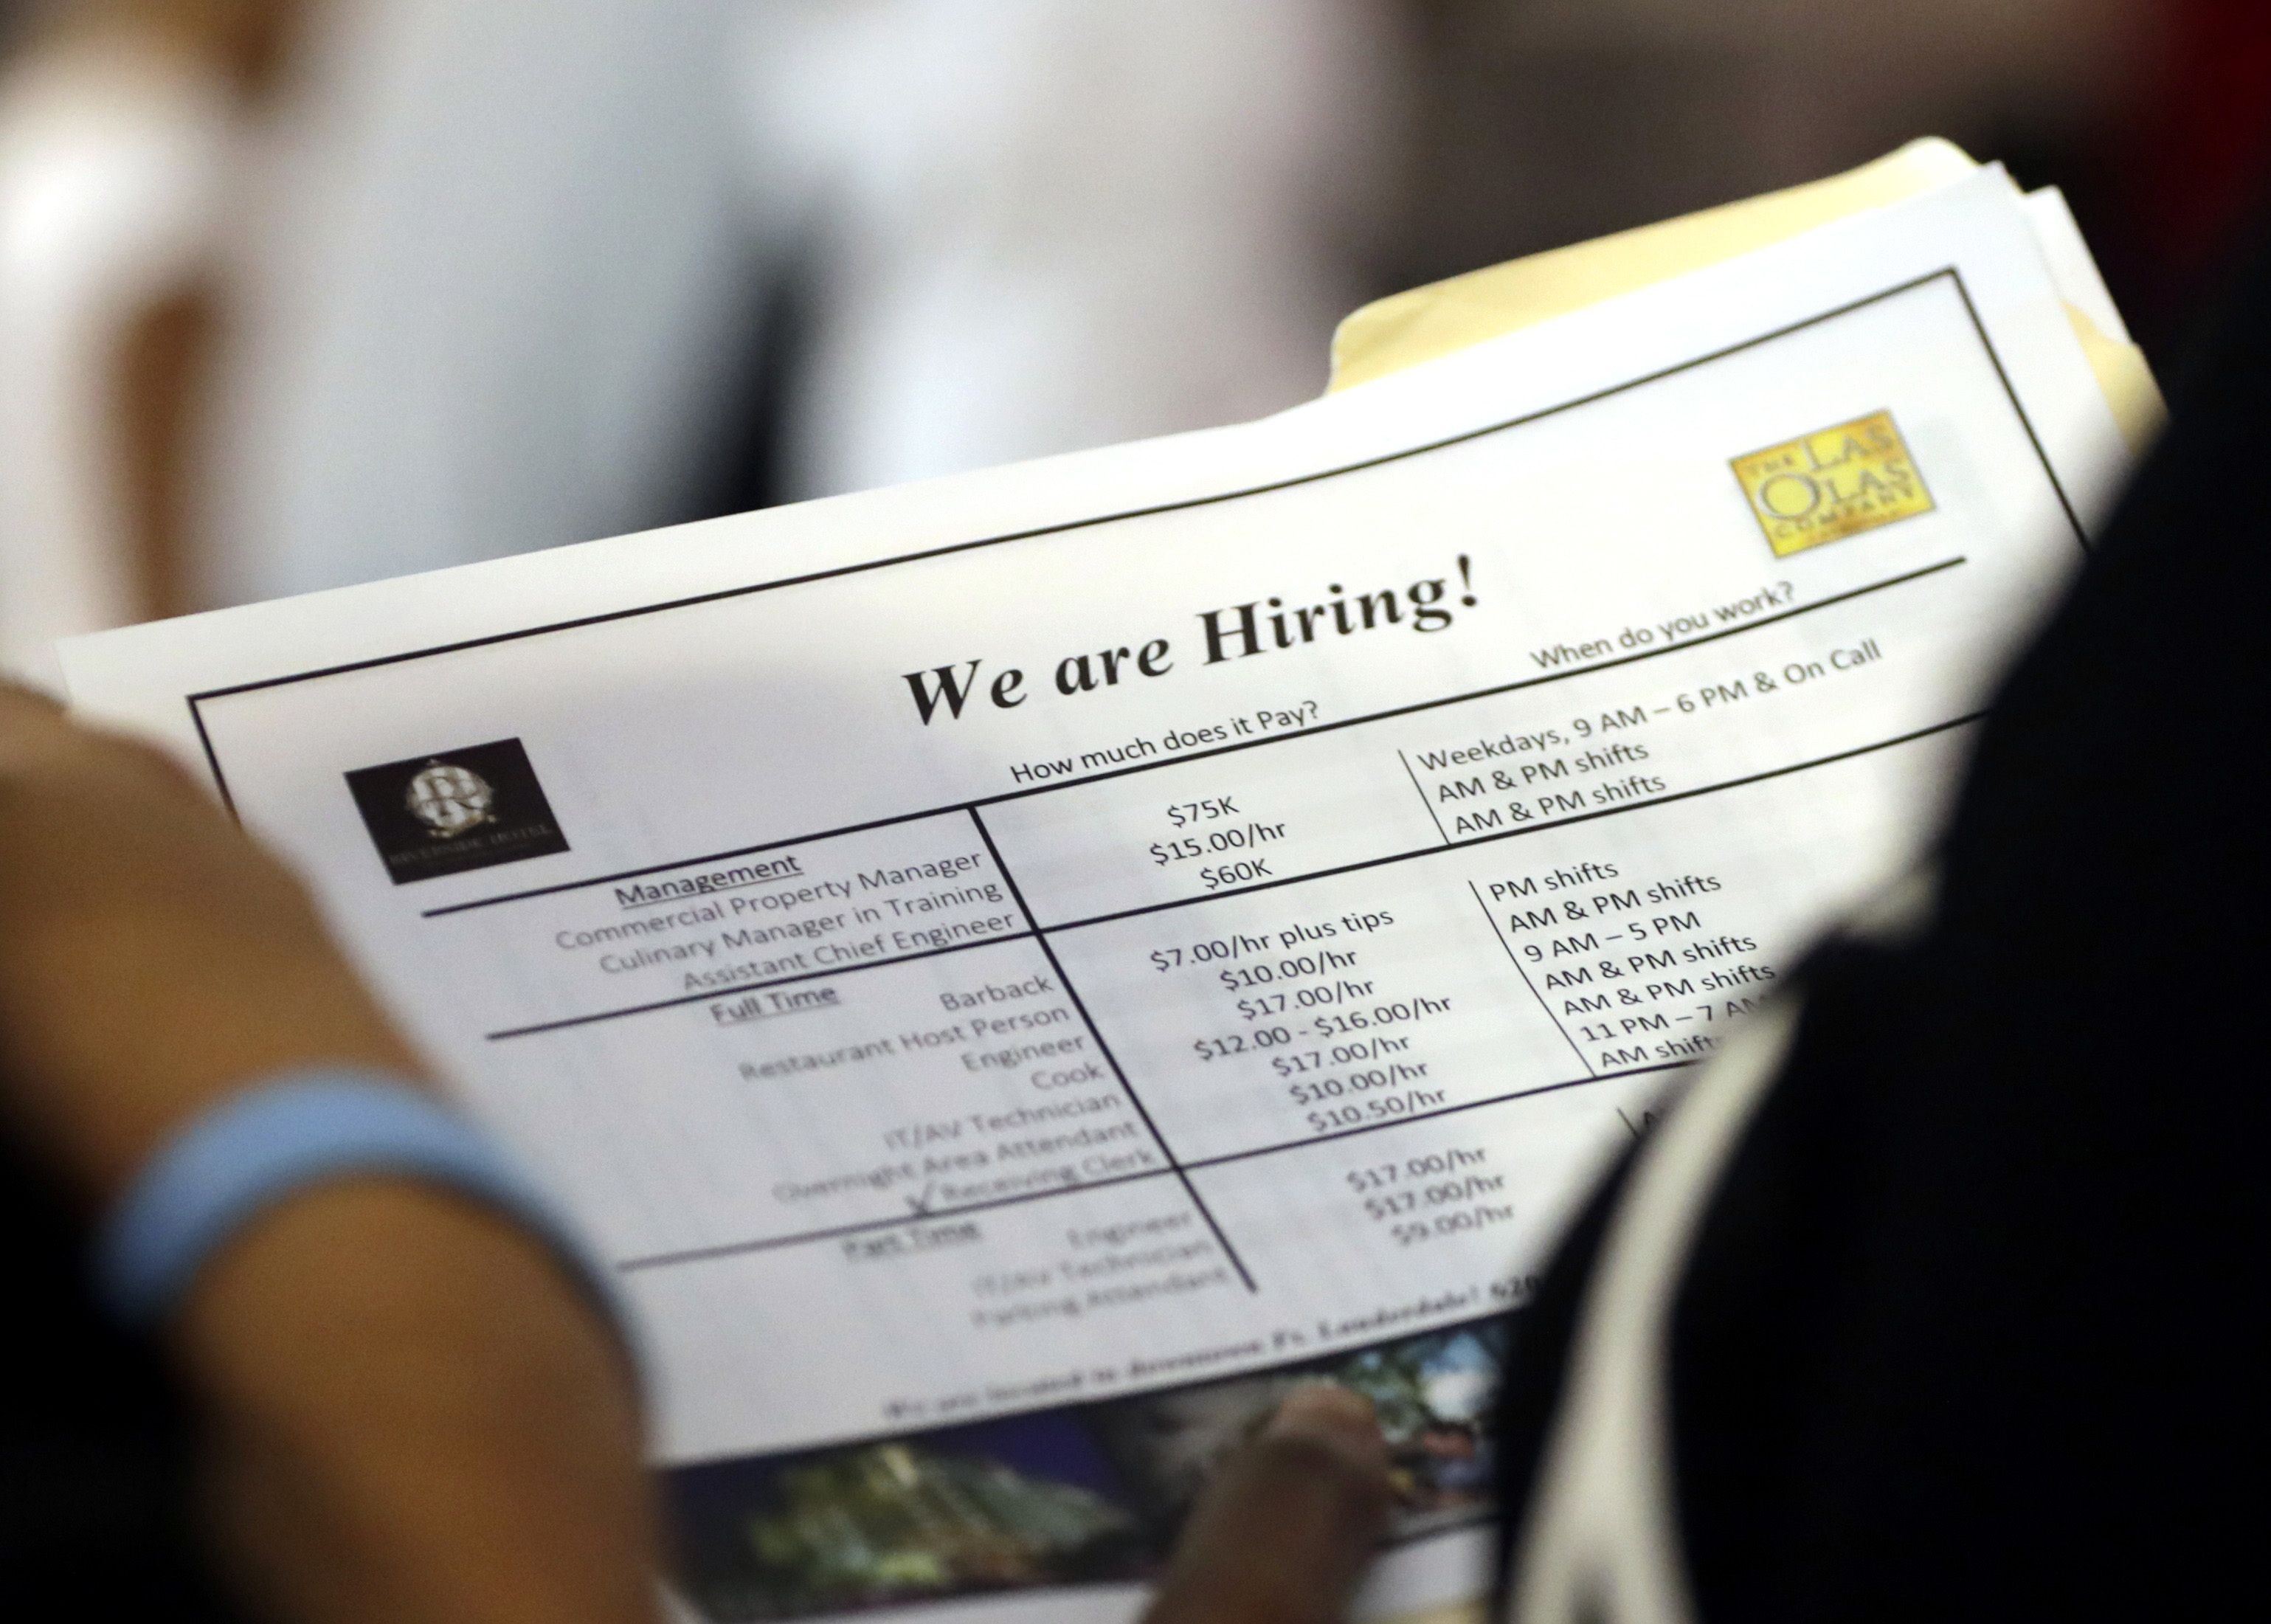 FILE In this June 21, 2018 file photo, a job applicant looks at job listings for the Riverside Hotel at a job fair hosted by Job News South Florida, in Sunrise, Fla. The U.S. unemployment rate fell to 3.7 percent in September 2018 the lowest level since December 1969 — signaling how the longest streak of hiring on record has put millions of Americans back to work. Employers added just 134,000 jobs last month, the fewest in a year, the Labor Department said Friday, Oct. 5. But that figure was likely depressed by the impact of Hurricane Florence. (AP Photo/Lynne Sladky)